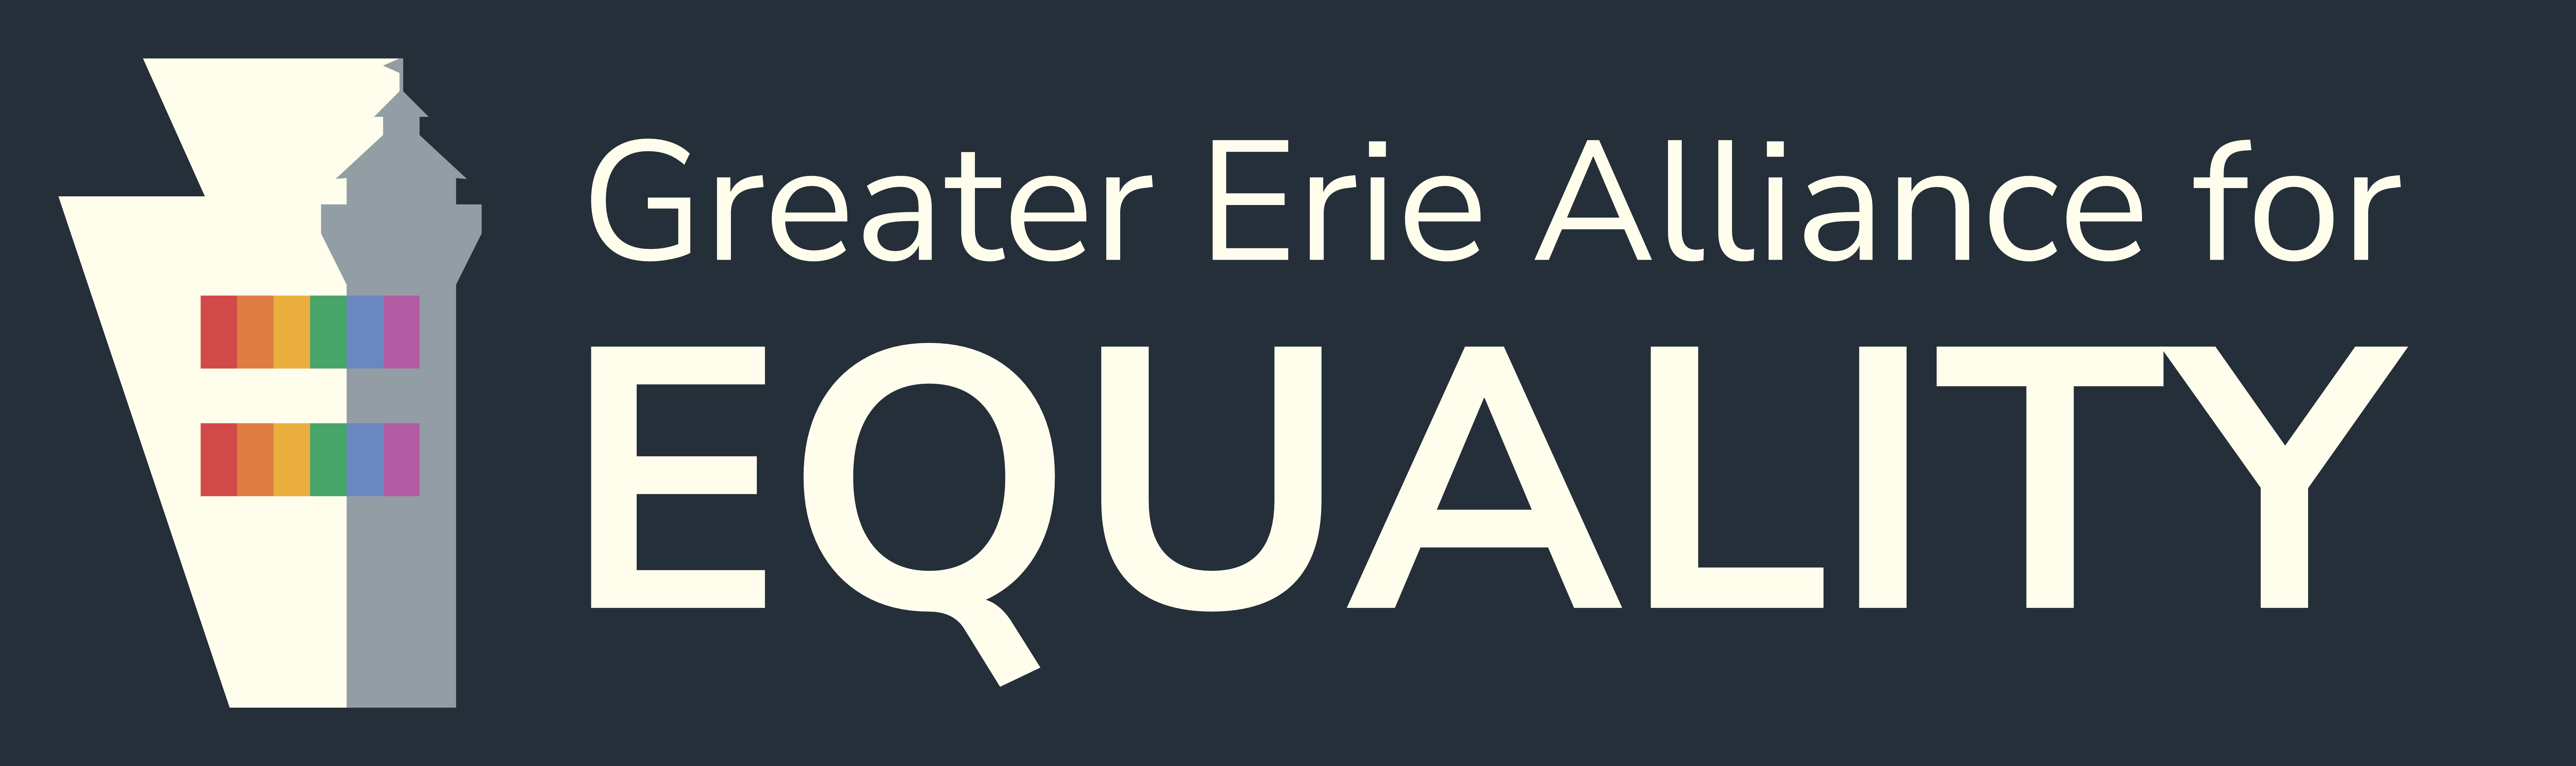 Greater Erie Alliance for Equality